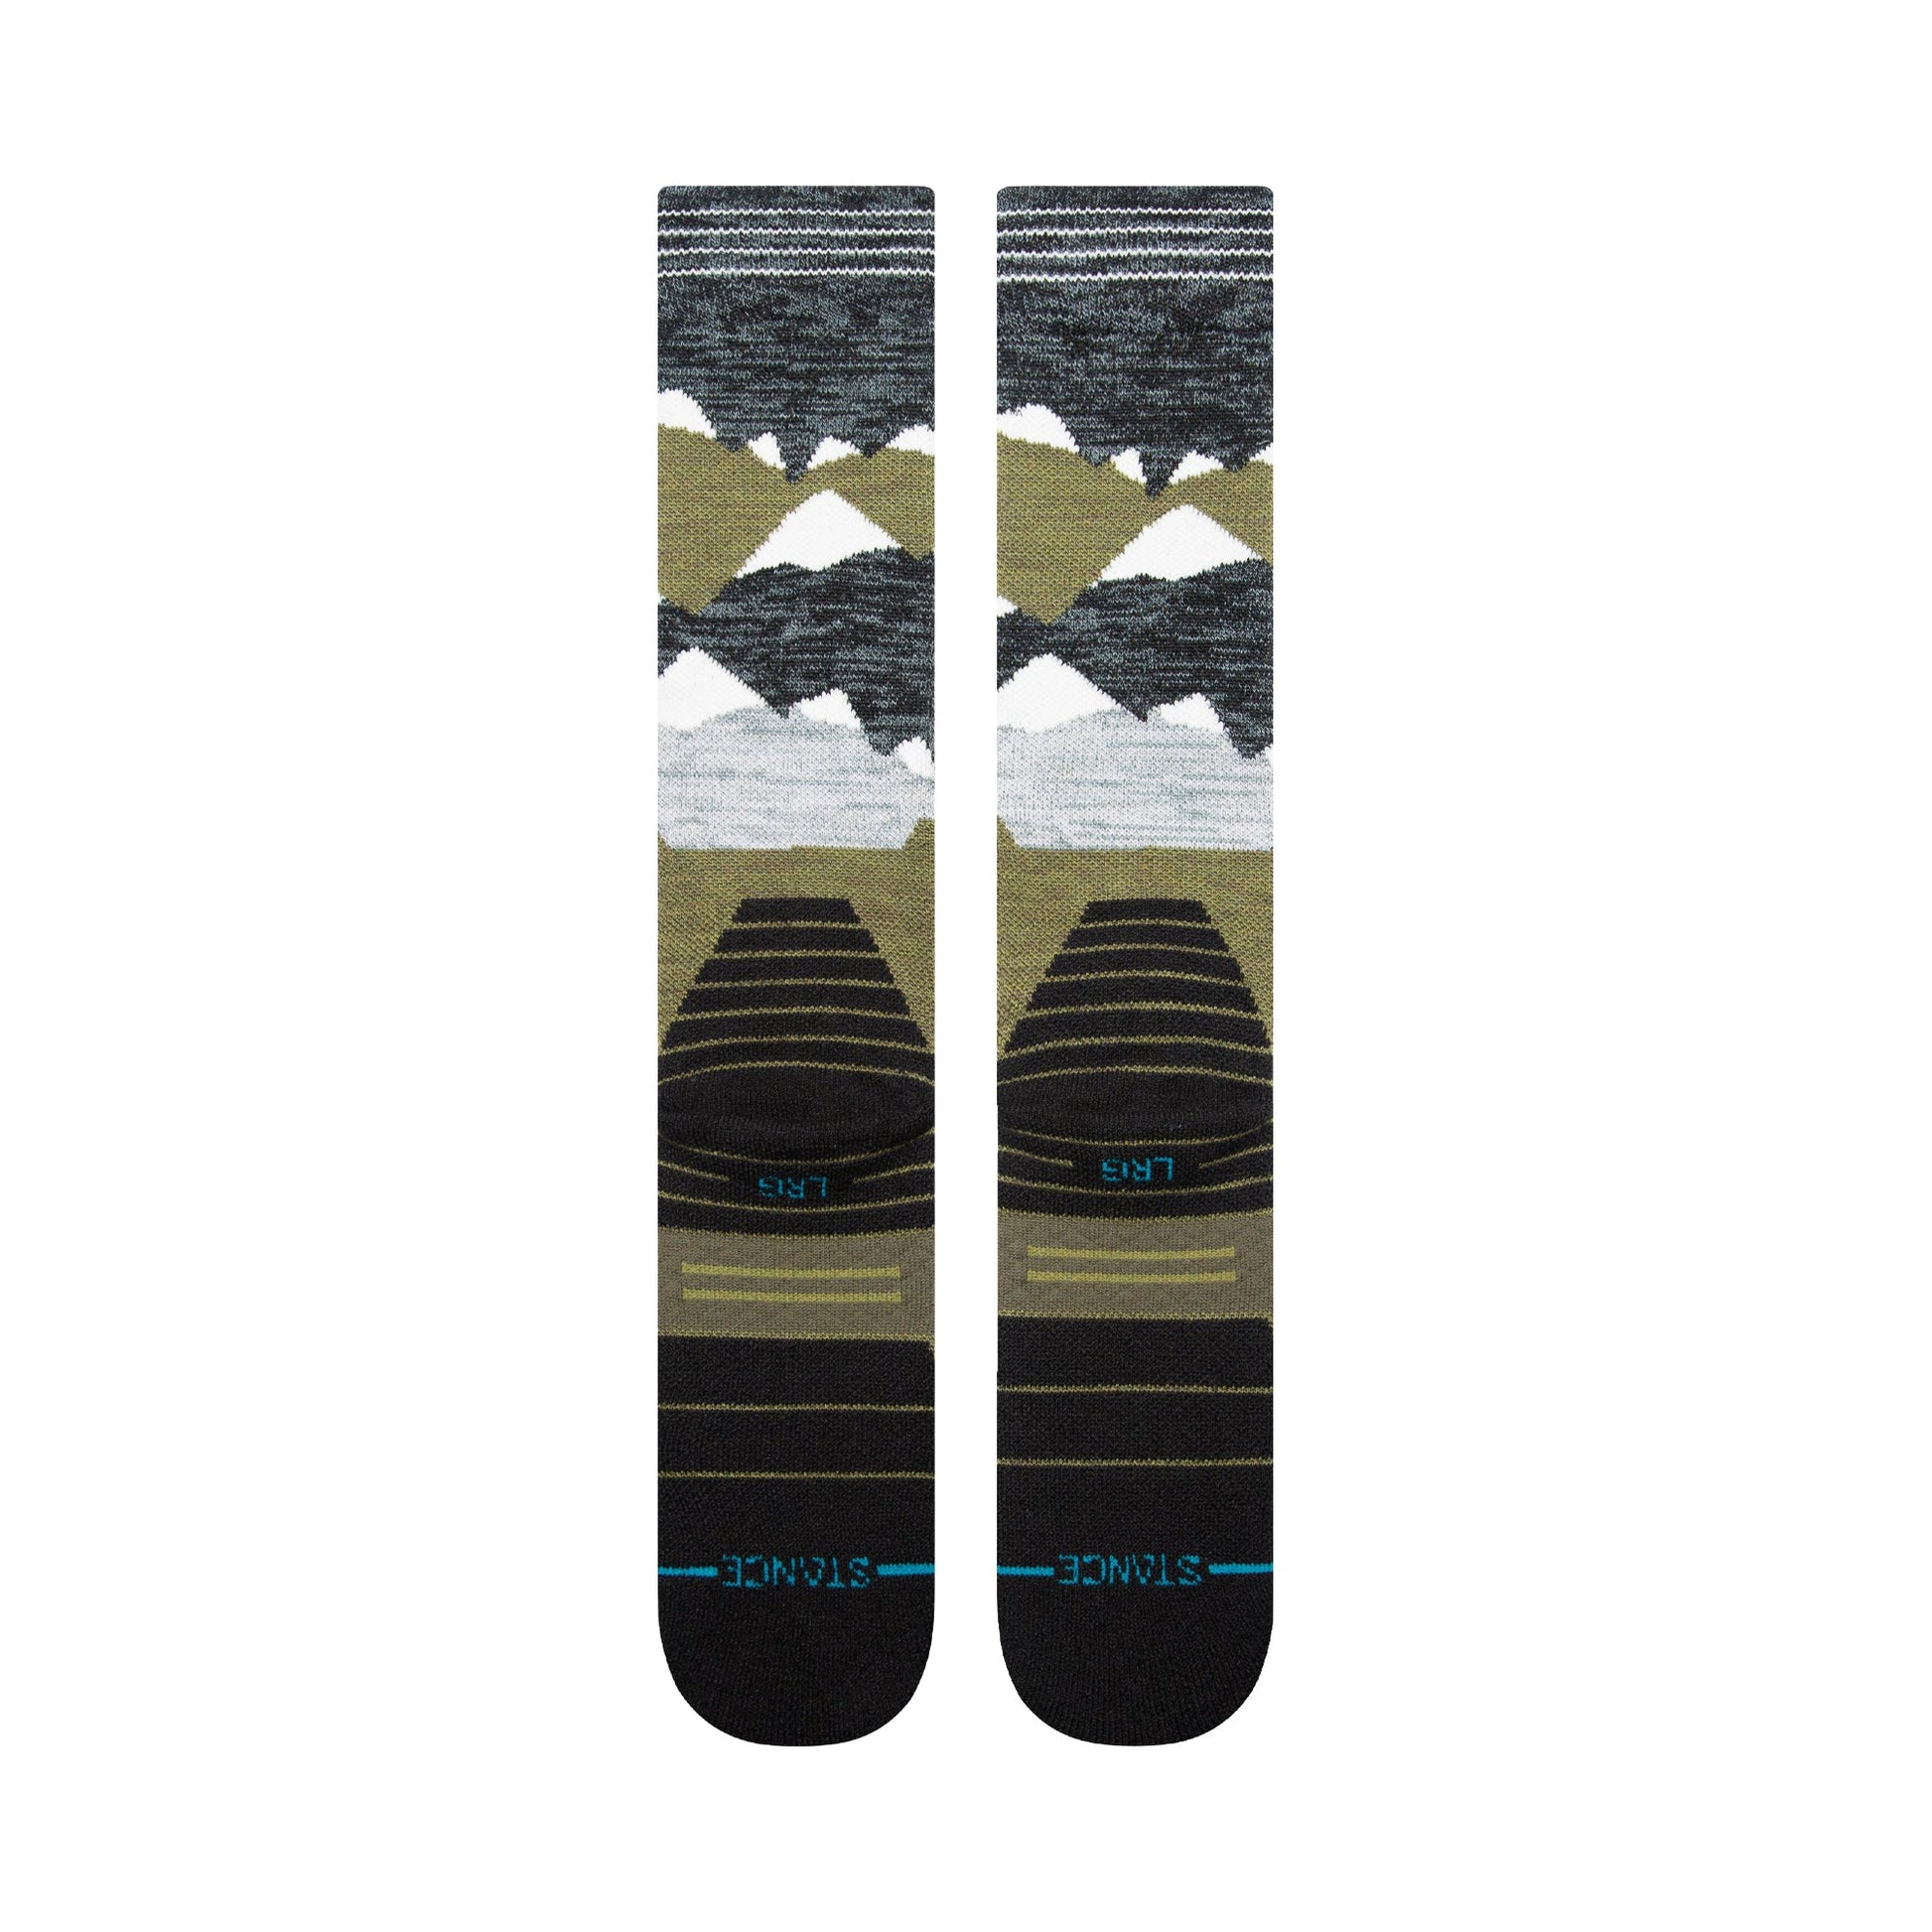 Lonely Peaks Snow Over The Calf Sock Teal